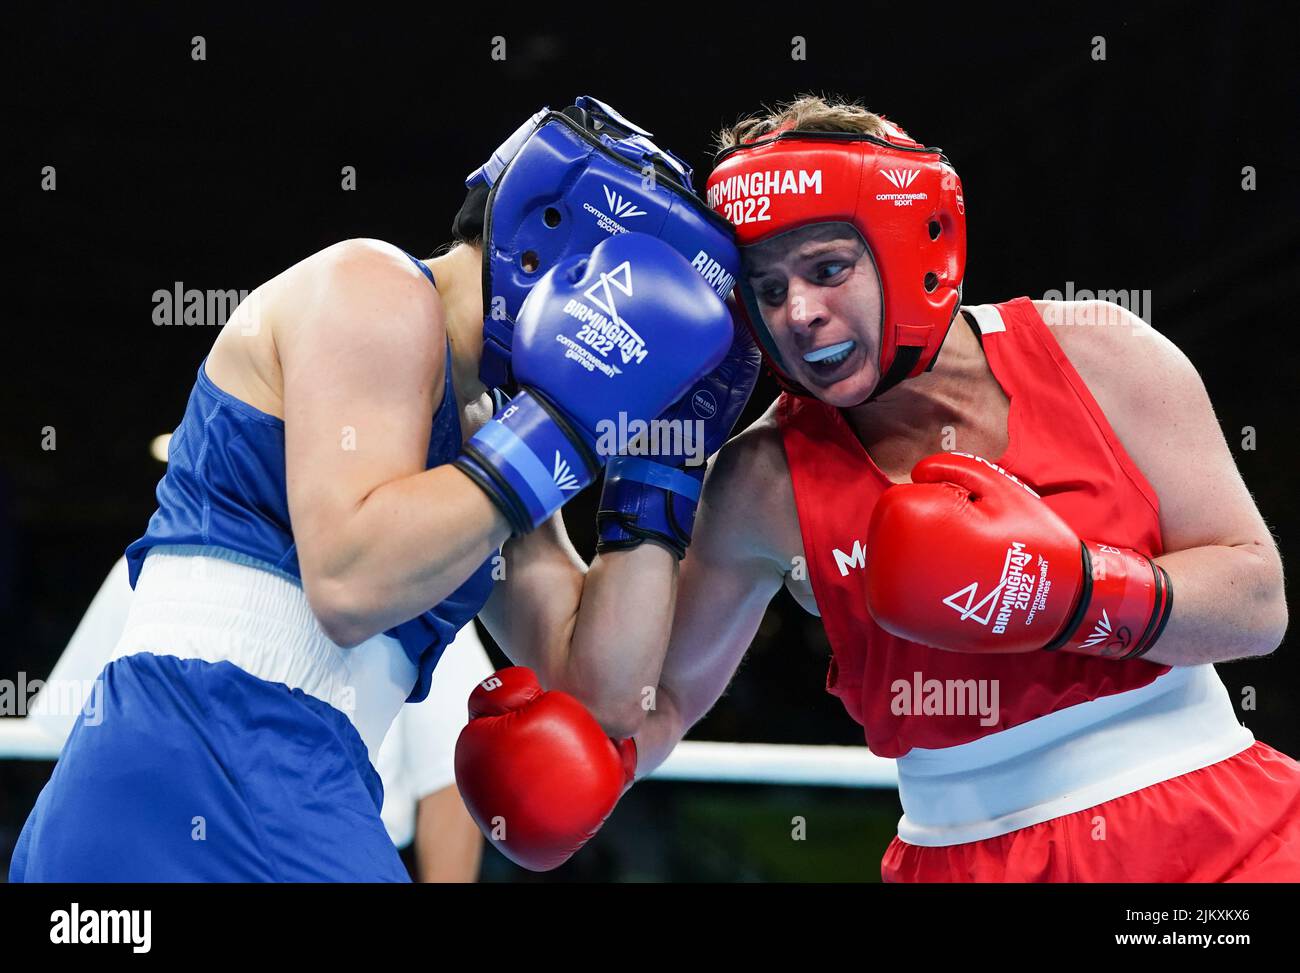 Northern Ireland's Eireann Cathlin Nugent (right) and England's Jodie Charlotte Wilkinson during the Women’s Over 66kg-70kg (Light Middle) - Quarter-Final 3 at The NEC on day six of the 2022 Commonwealth Games in Birmingham. Picture date: Wednesday August 3, 2022. Stock Photo